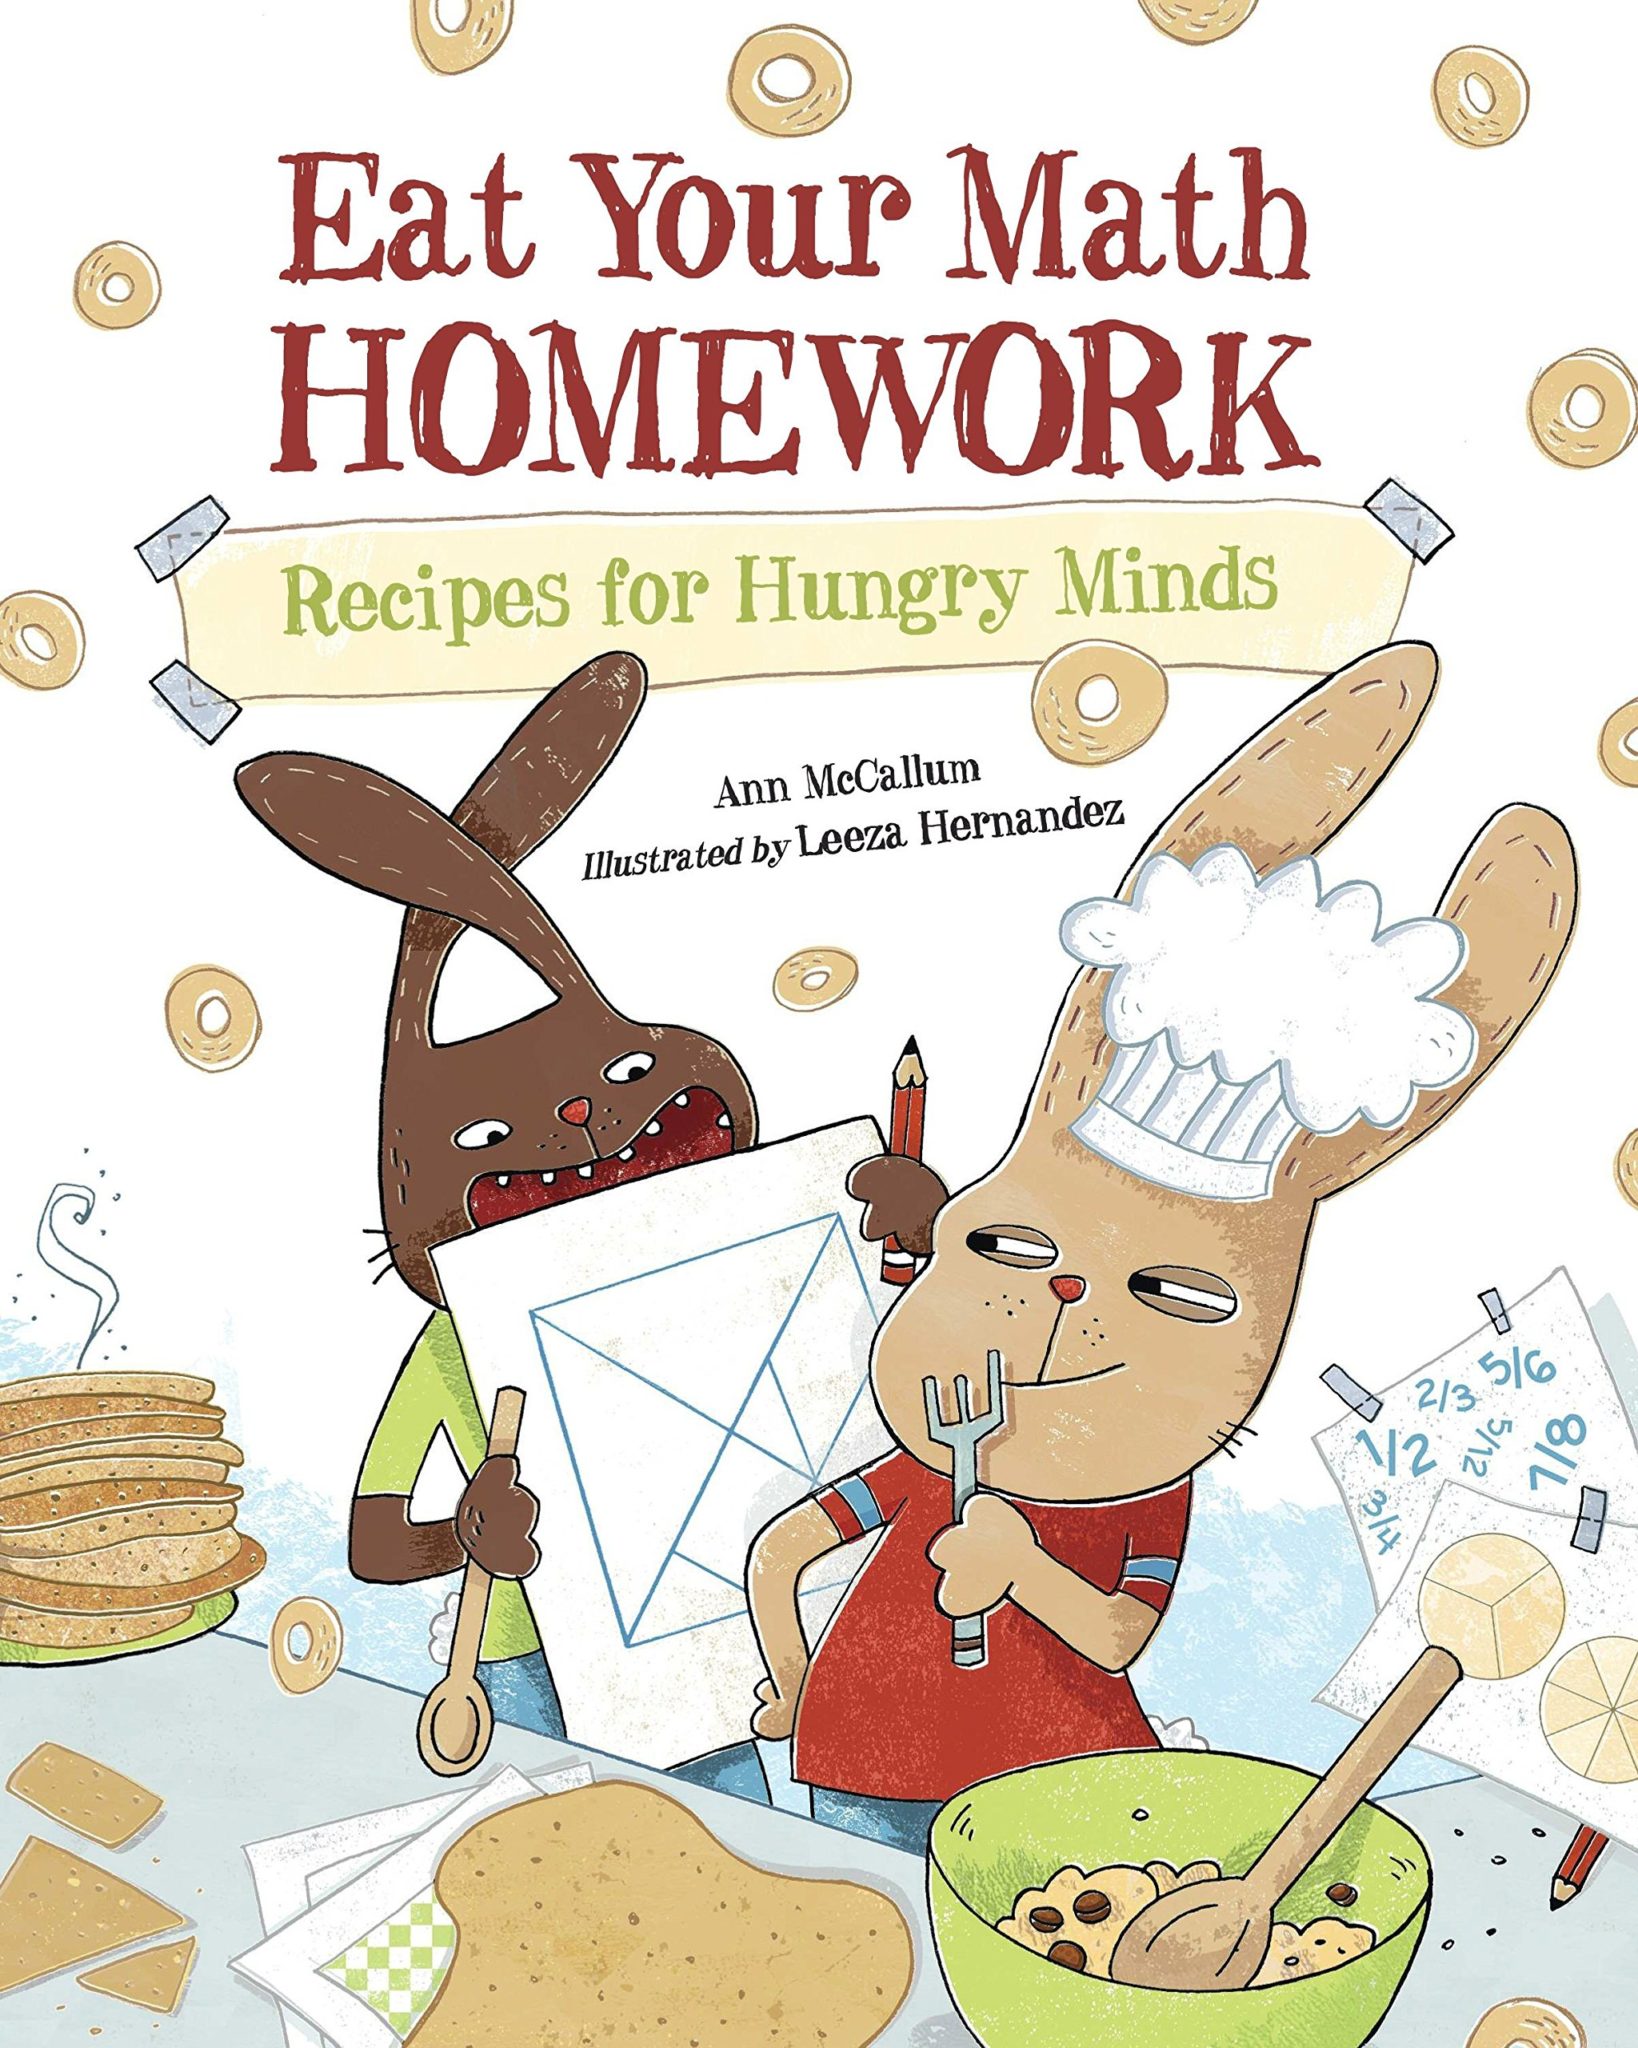 The cover of "Eat Your Math Homework" features two silly bunnies in a messy kitchen. One bunny holds a large chart demonstrating tangrams. The other bunny wears a chef hat and contemplates the chart.